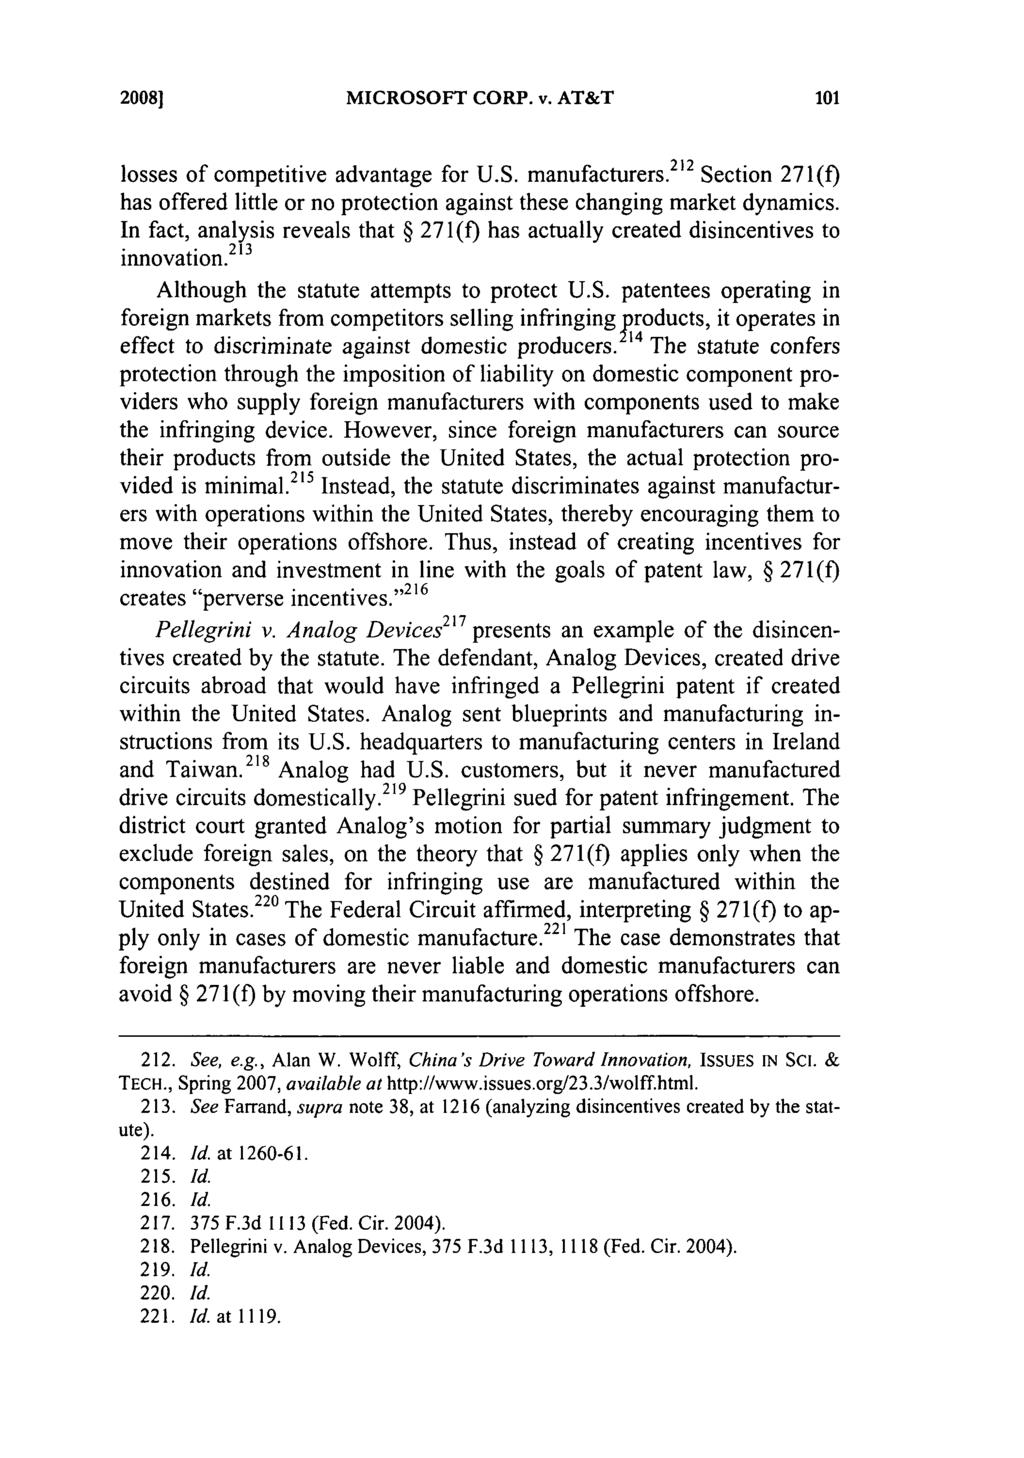 20081 MICROSOFT CORP. v. AT&T losses of competitive advantage for U.S. manufacturers.212 Section 271(f) has offered little or no protection against these changing market dynamics.